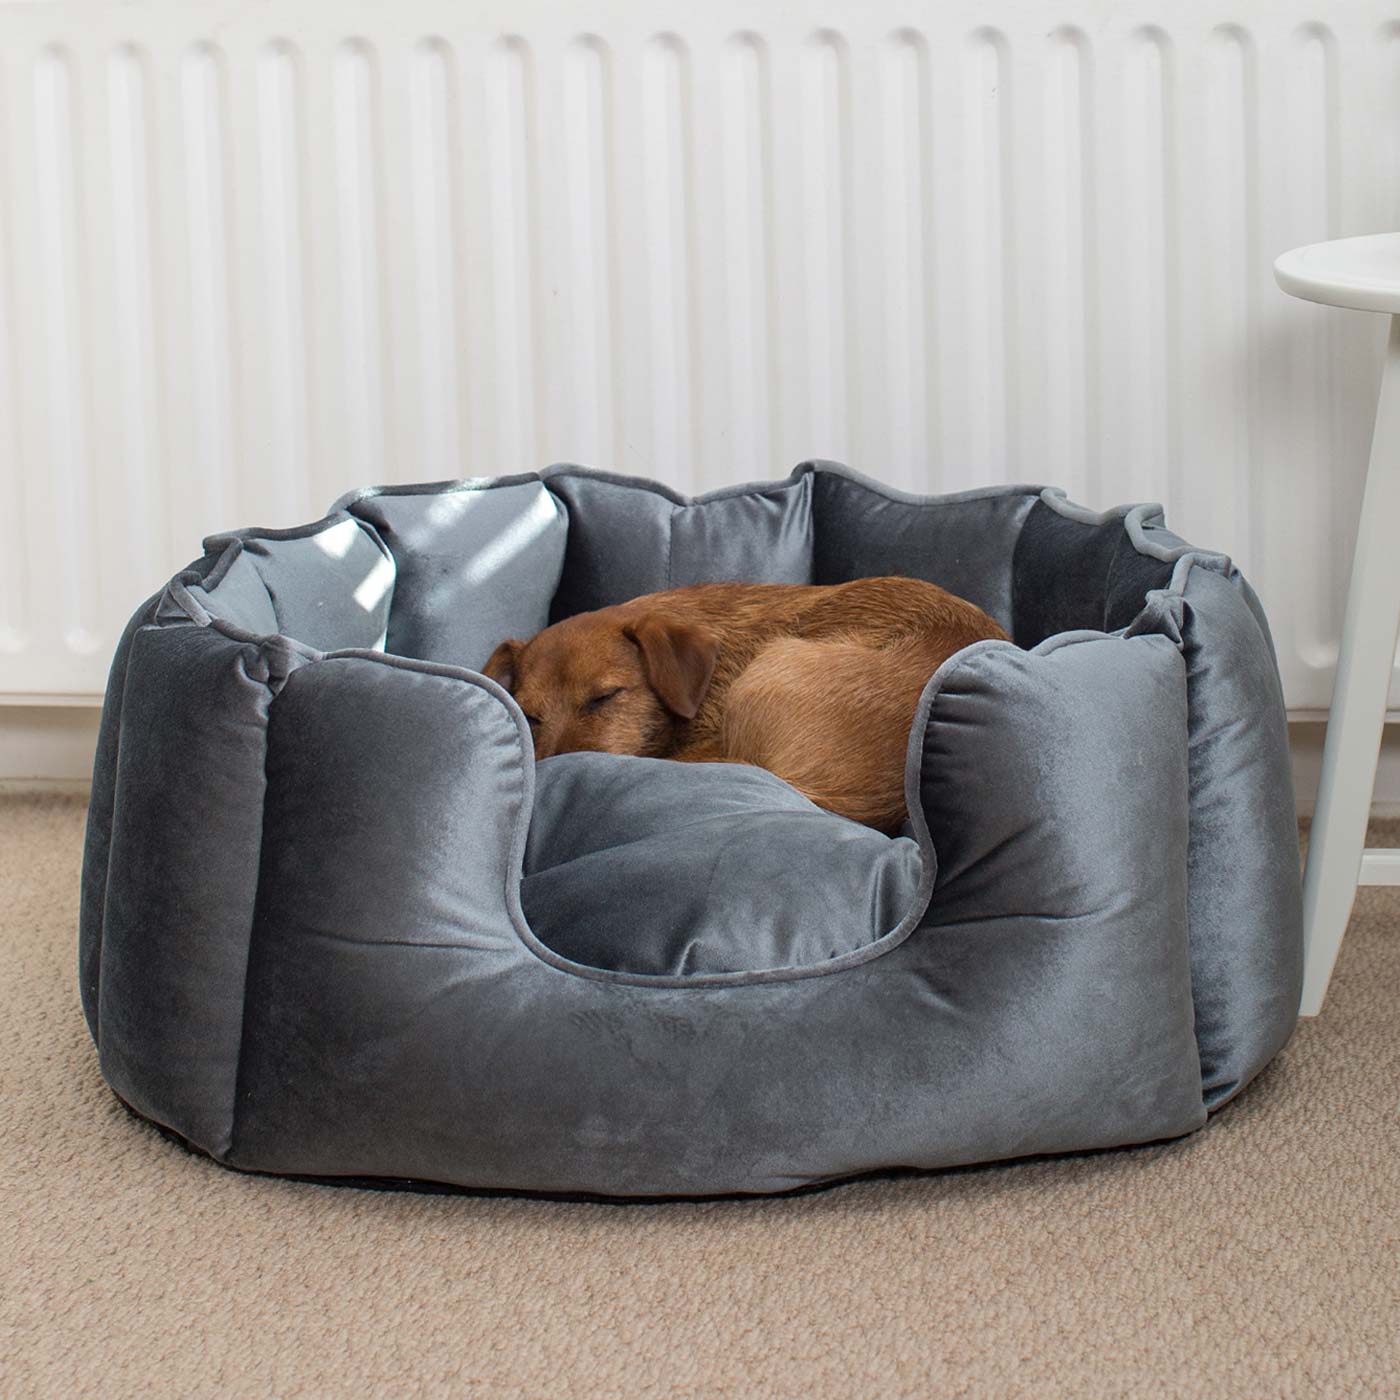 Discover Our Luxurious High Wall Velvet Bed For Dogs, Featuring inner pillow with plush teddy fleece on one side To Craft The Perfect Dogs Bed In Stunning Elephant Velvet! Available To Personalise Now at Lords & Labradors 